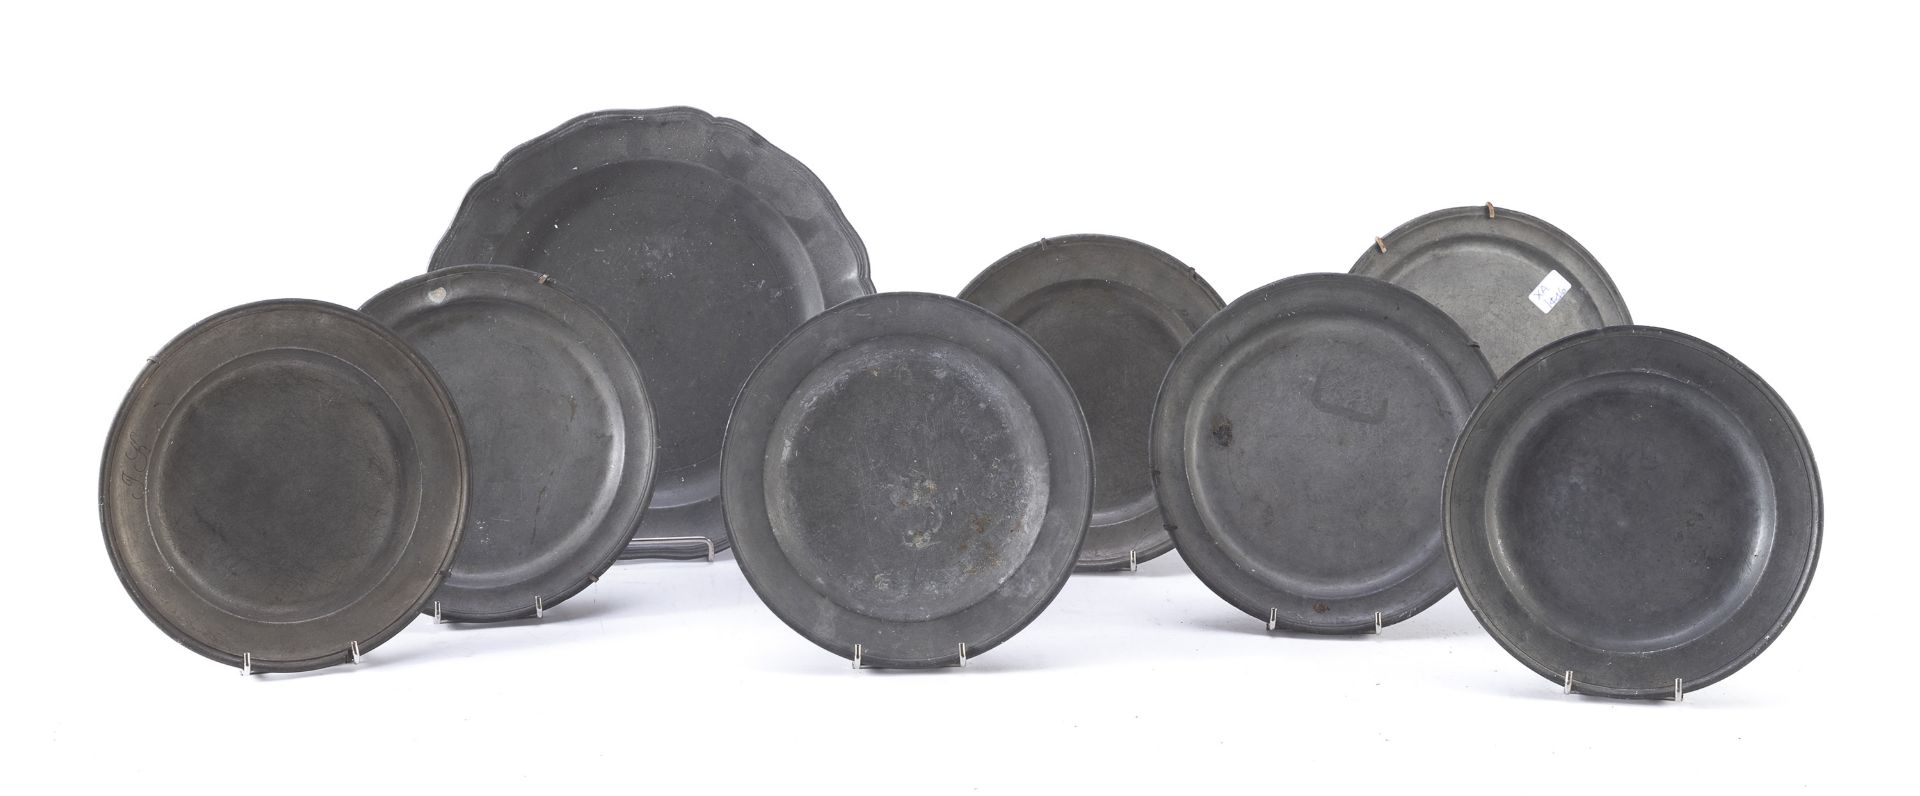 EIGHT PLATES IN PEWTER 18TH-19TH CENTURY